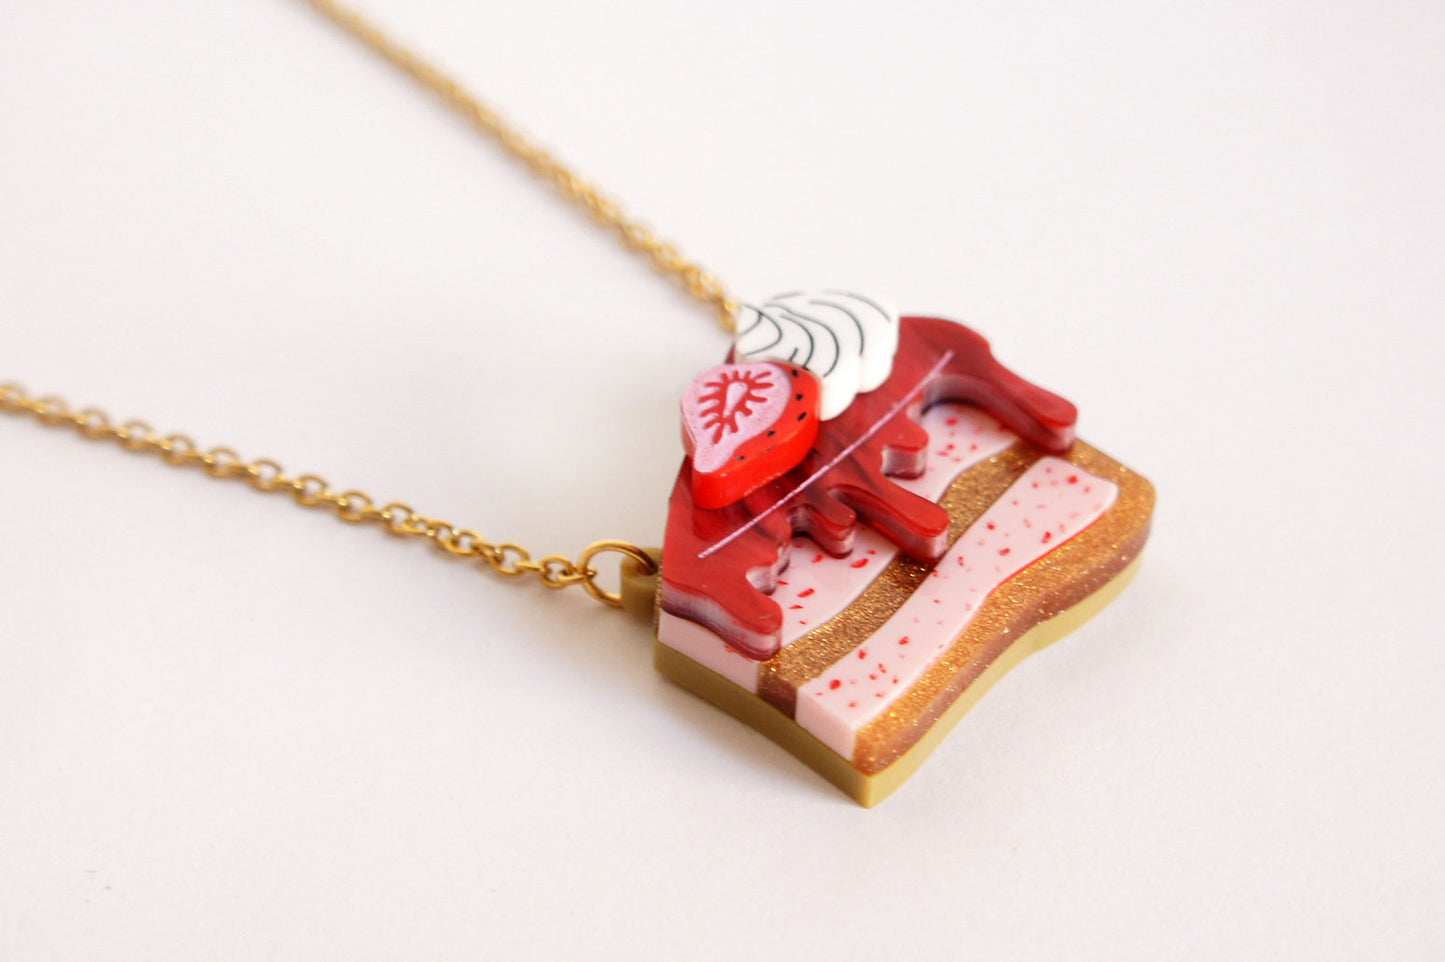 Strawberry Cake Necklace by LaliBlue